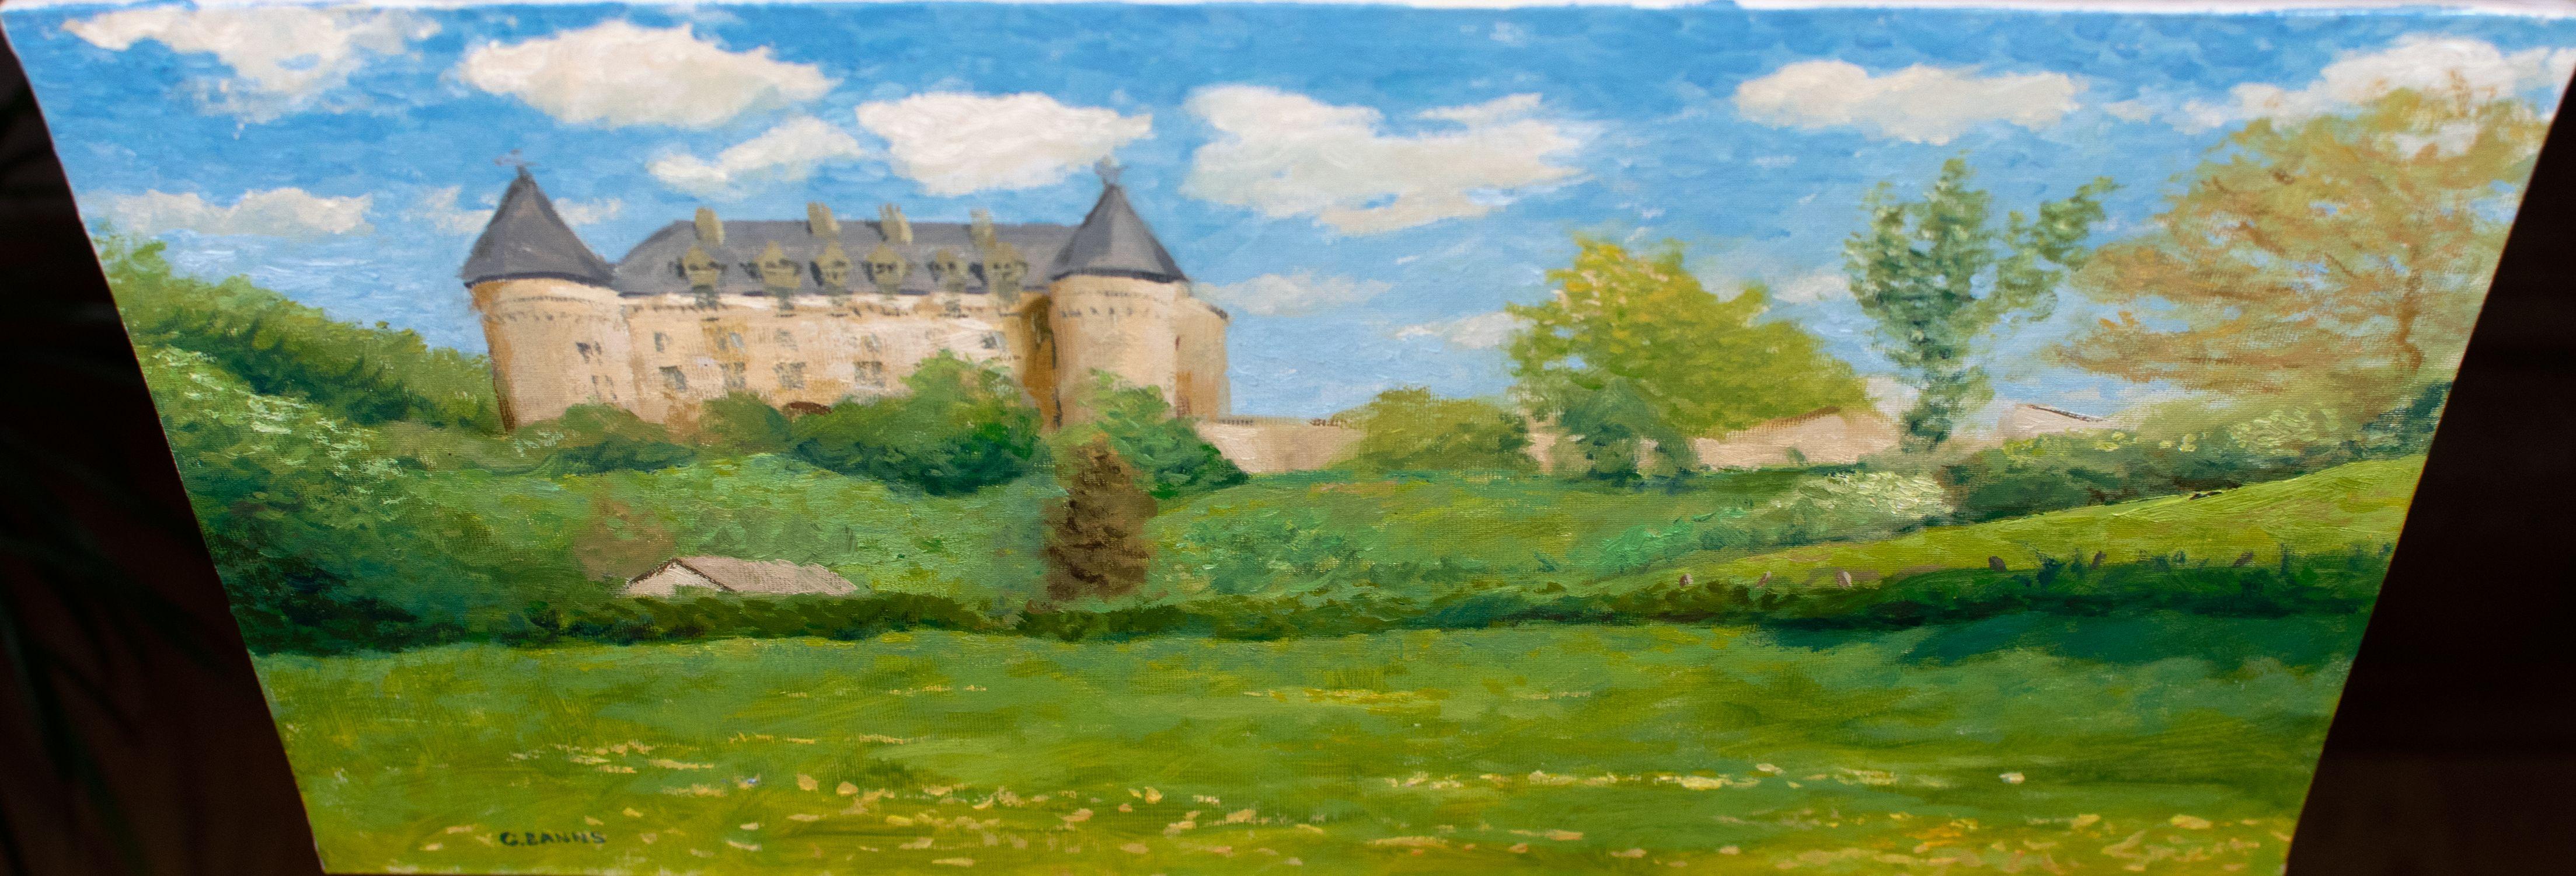 The ChÃ¢teau de Rochechouart can be found in the department of Haute-Vienne in rural France. It sits aloft a promontory rock, and houses a contemporary modern art gallery.    This oil painting has been created with the finest pigments, painted in an